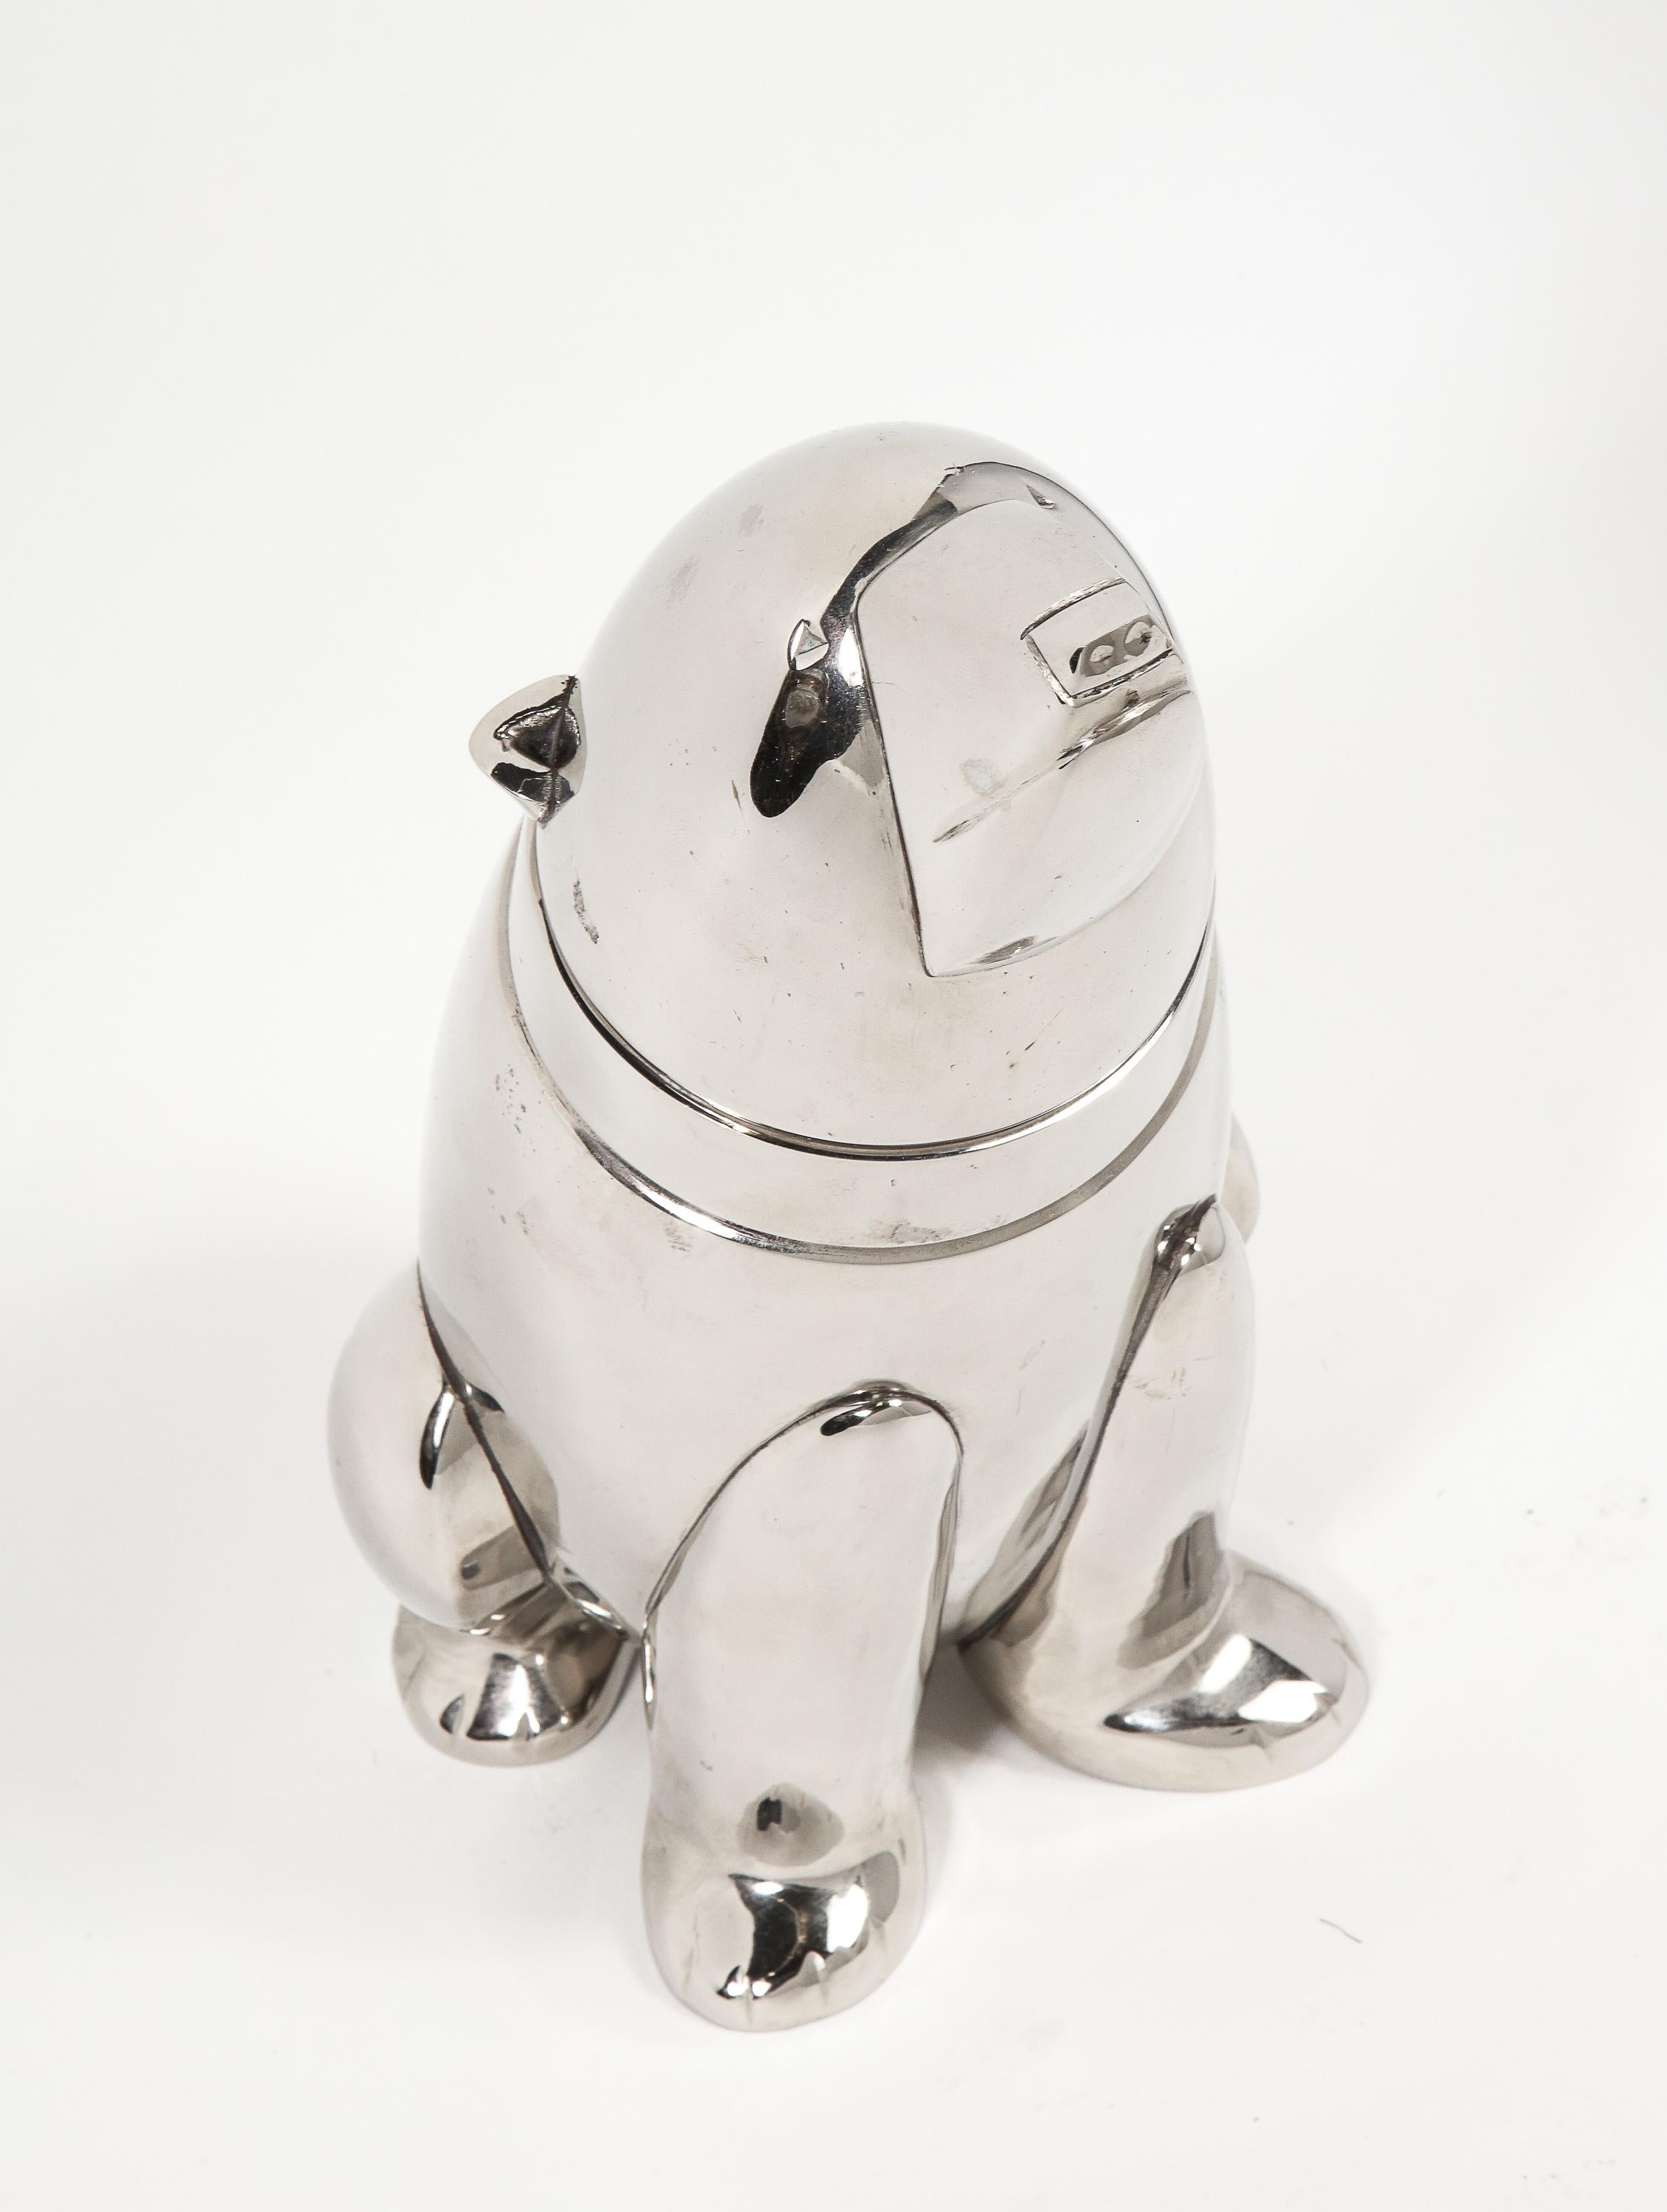 American Vintage Silver Plated Cocktail Shaker in the Form of a Polar Bear